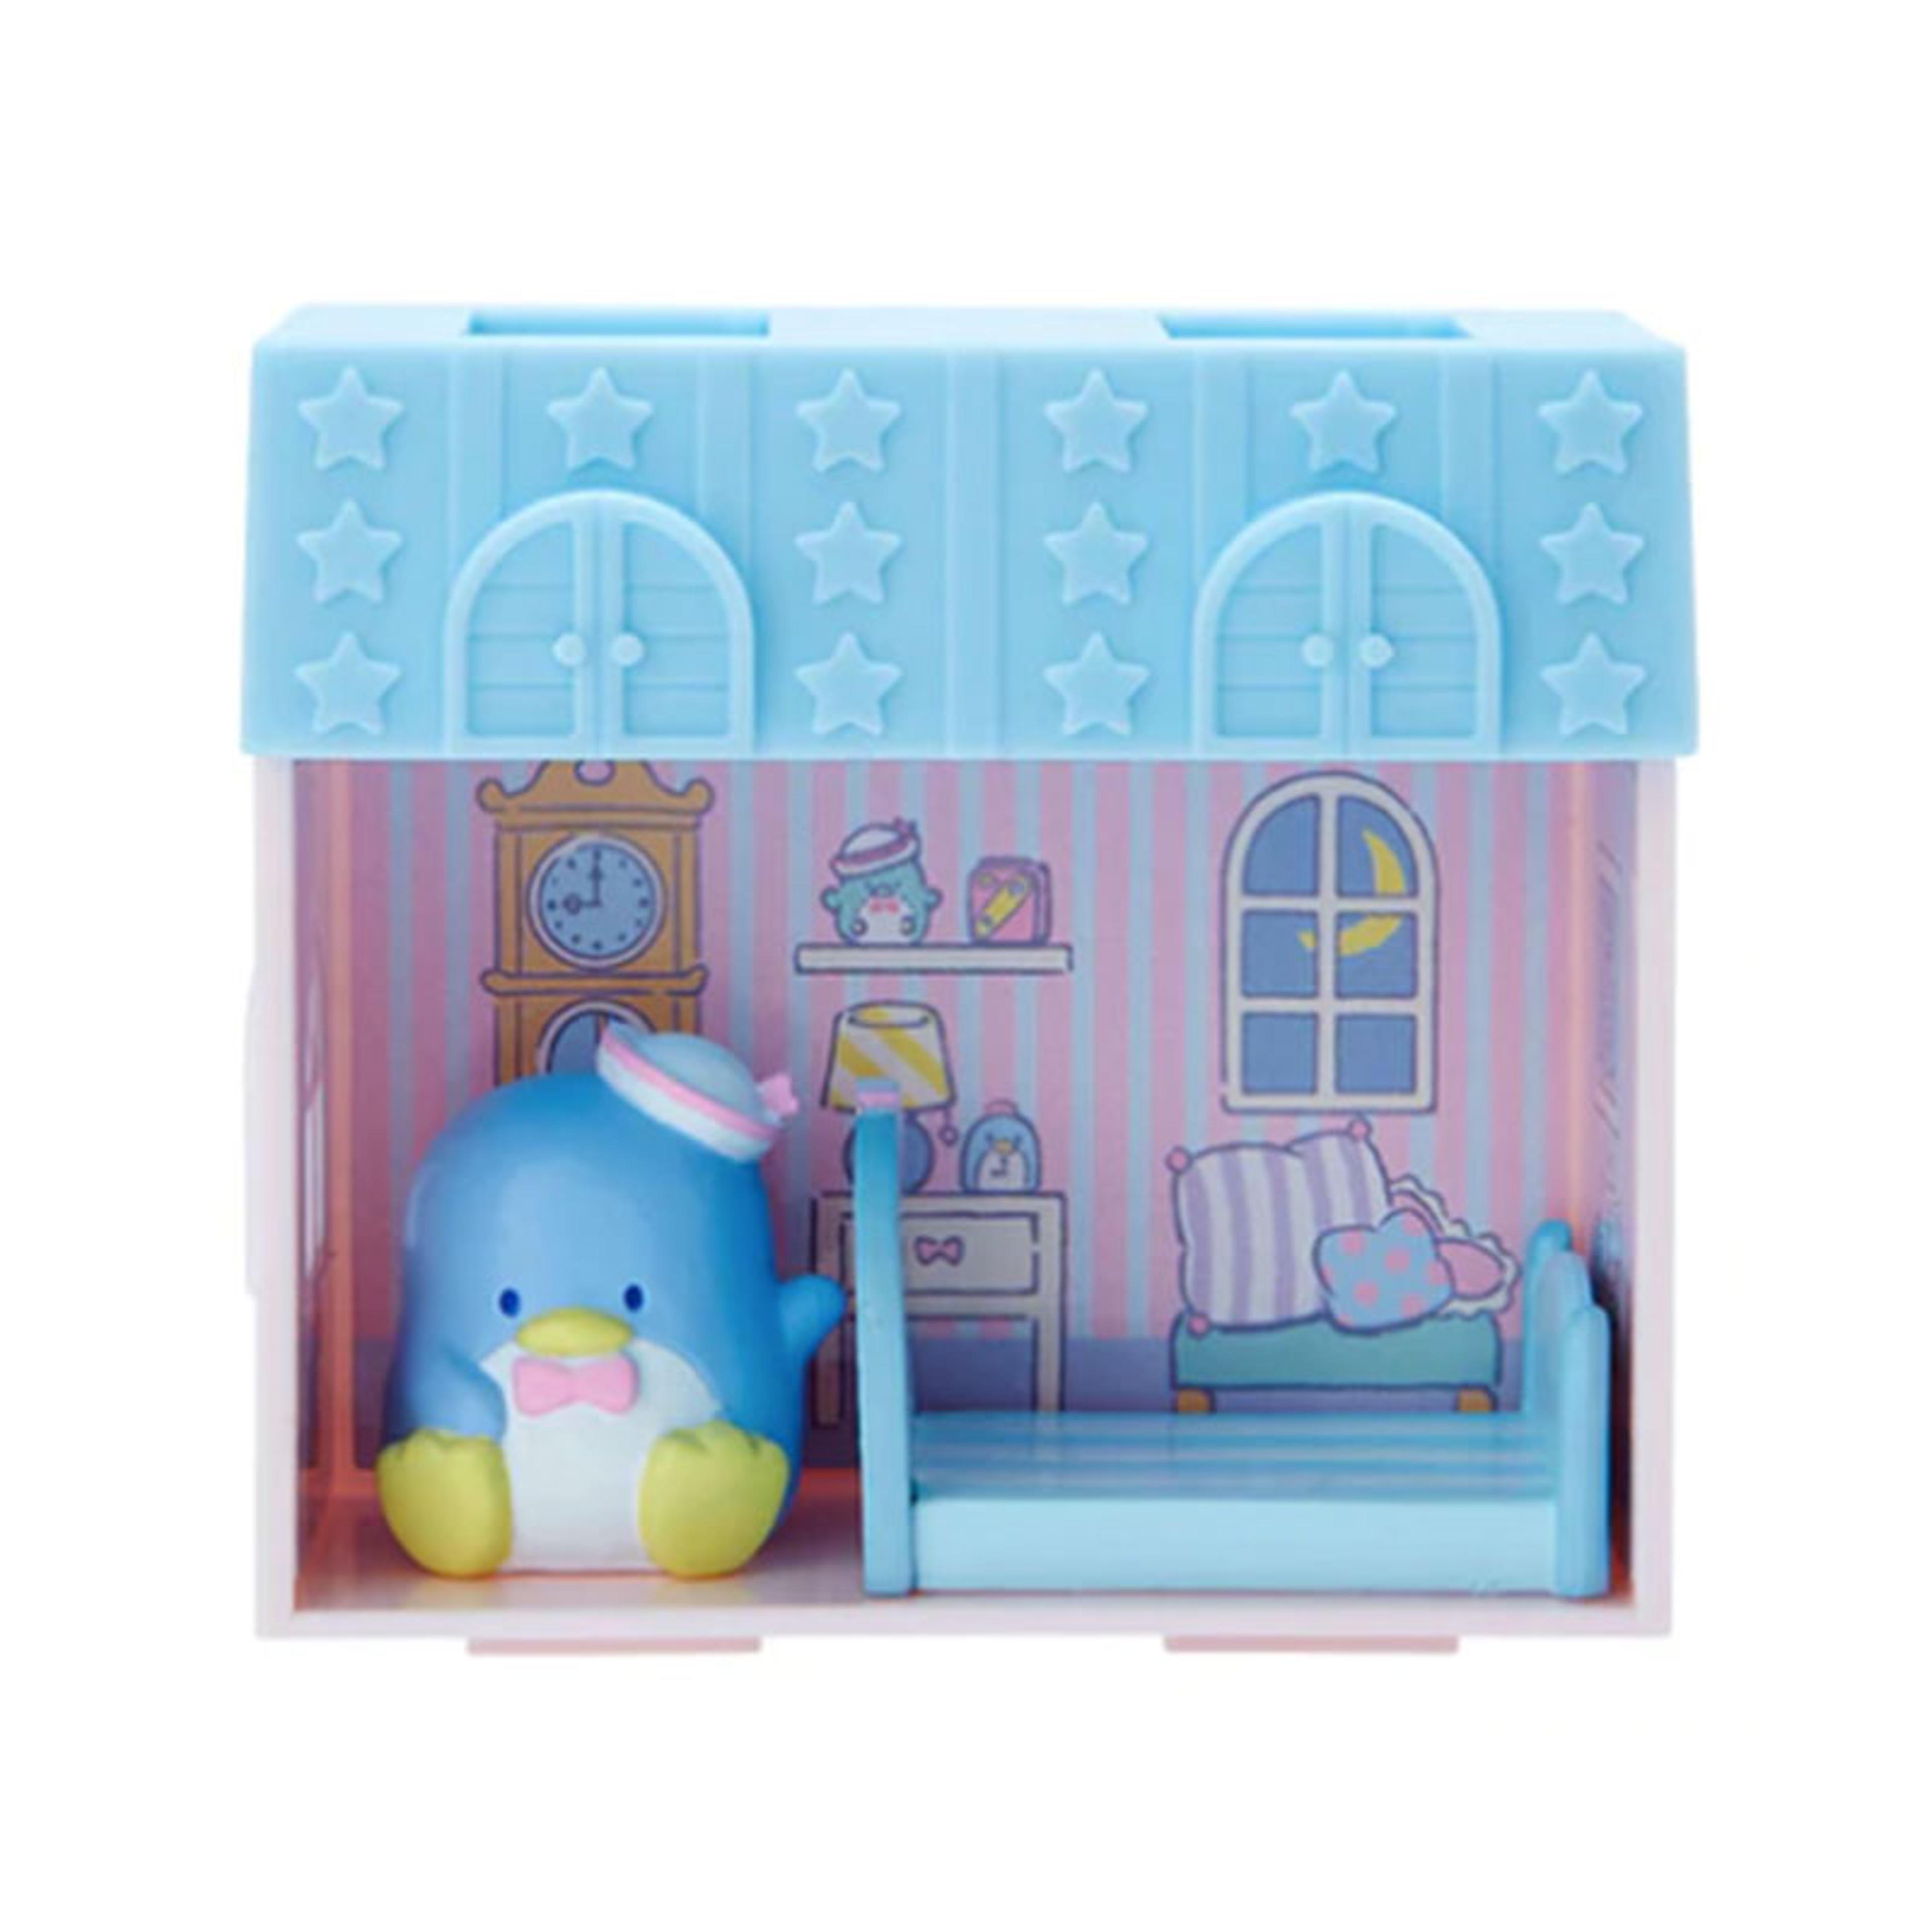 Alternate View 6 of Sanrio Characters Miniature House